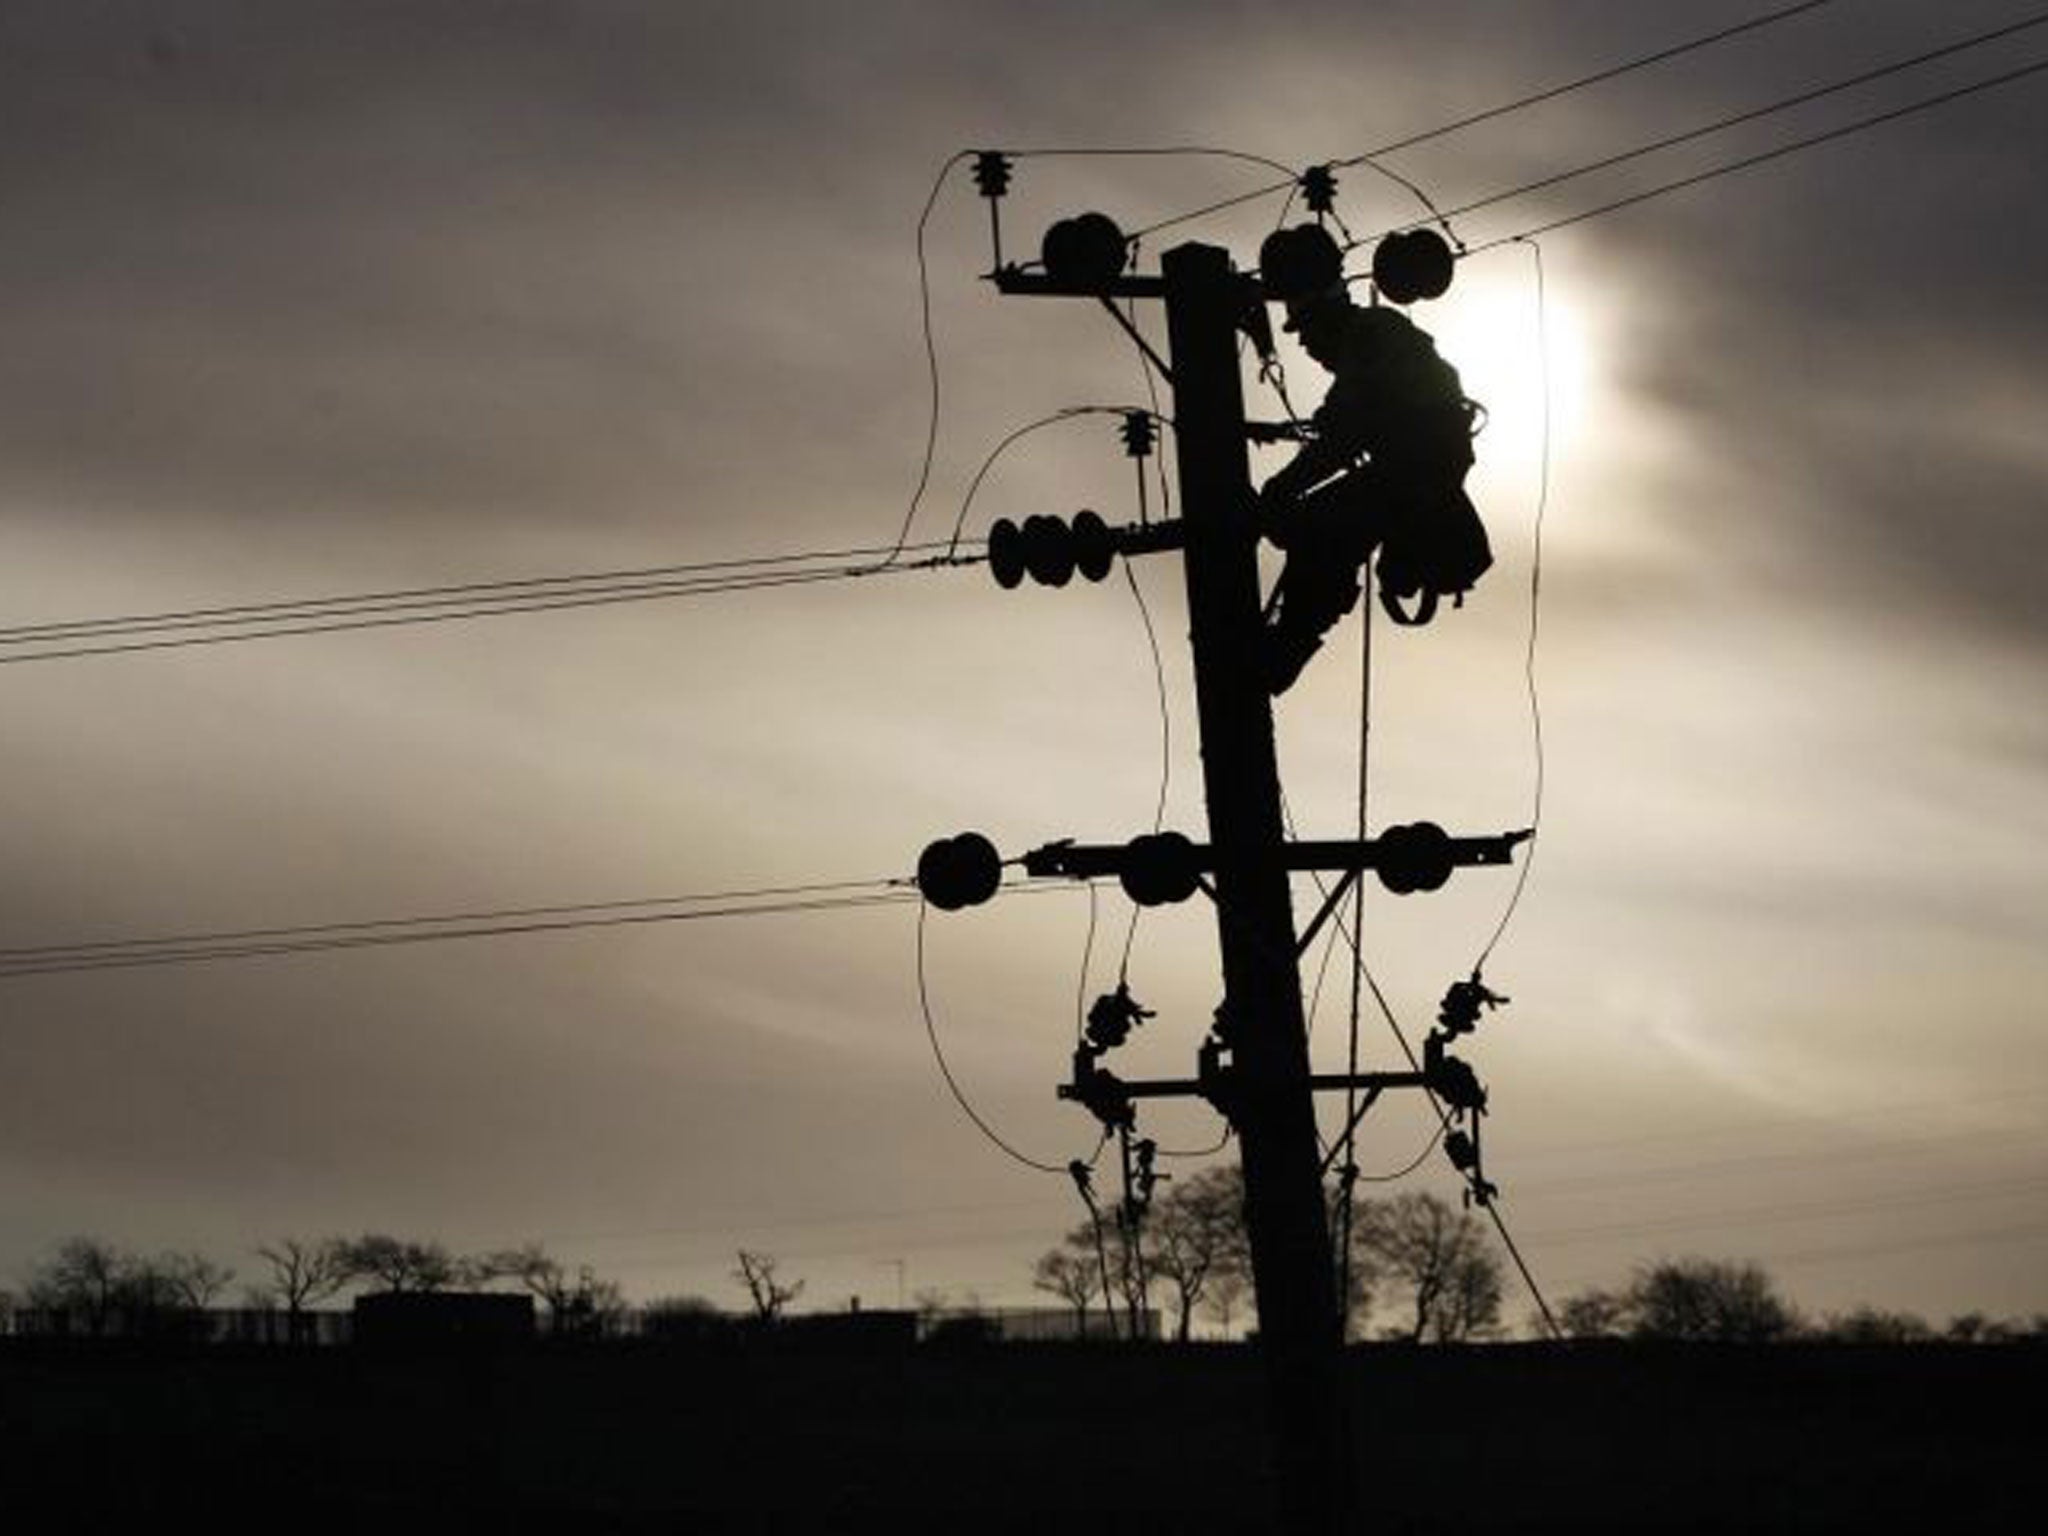 Complaints about Scottish Power increased by 488 per cent in 2014